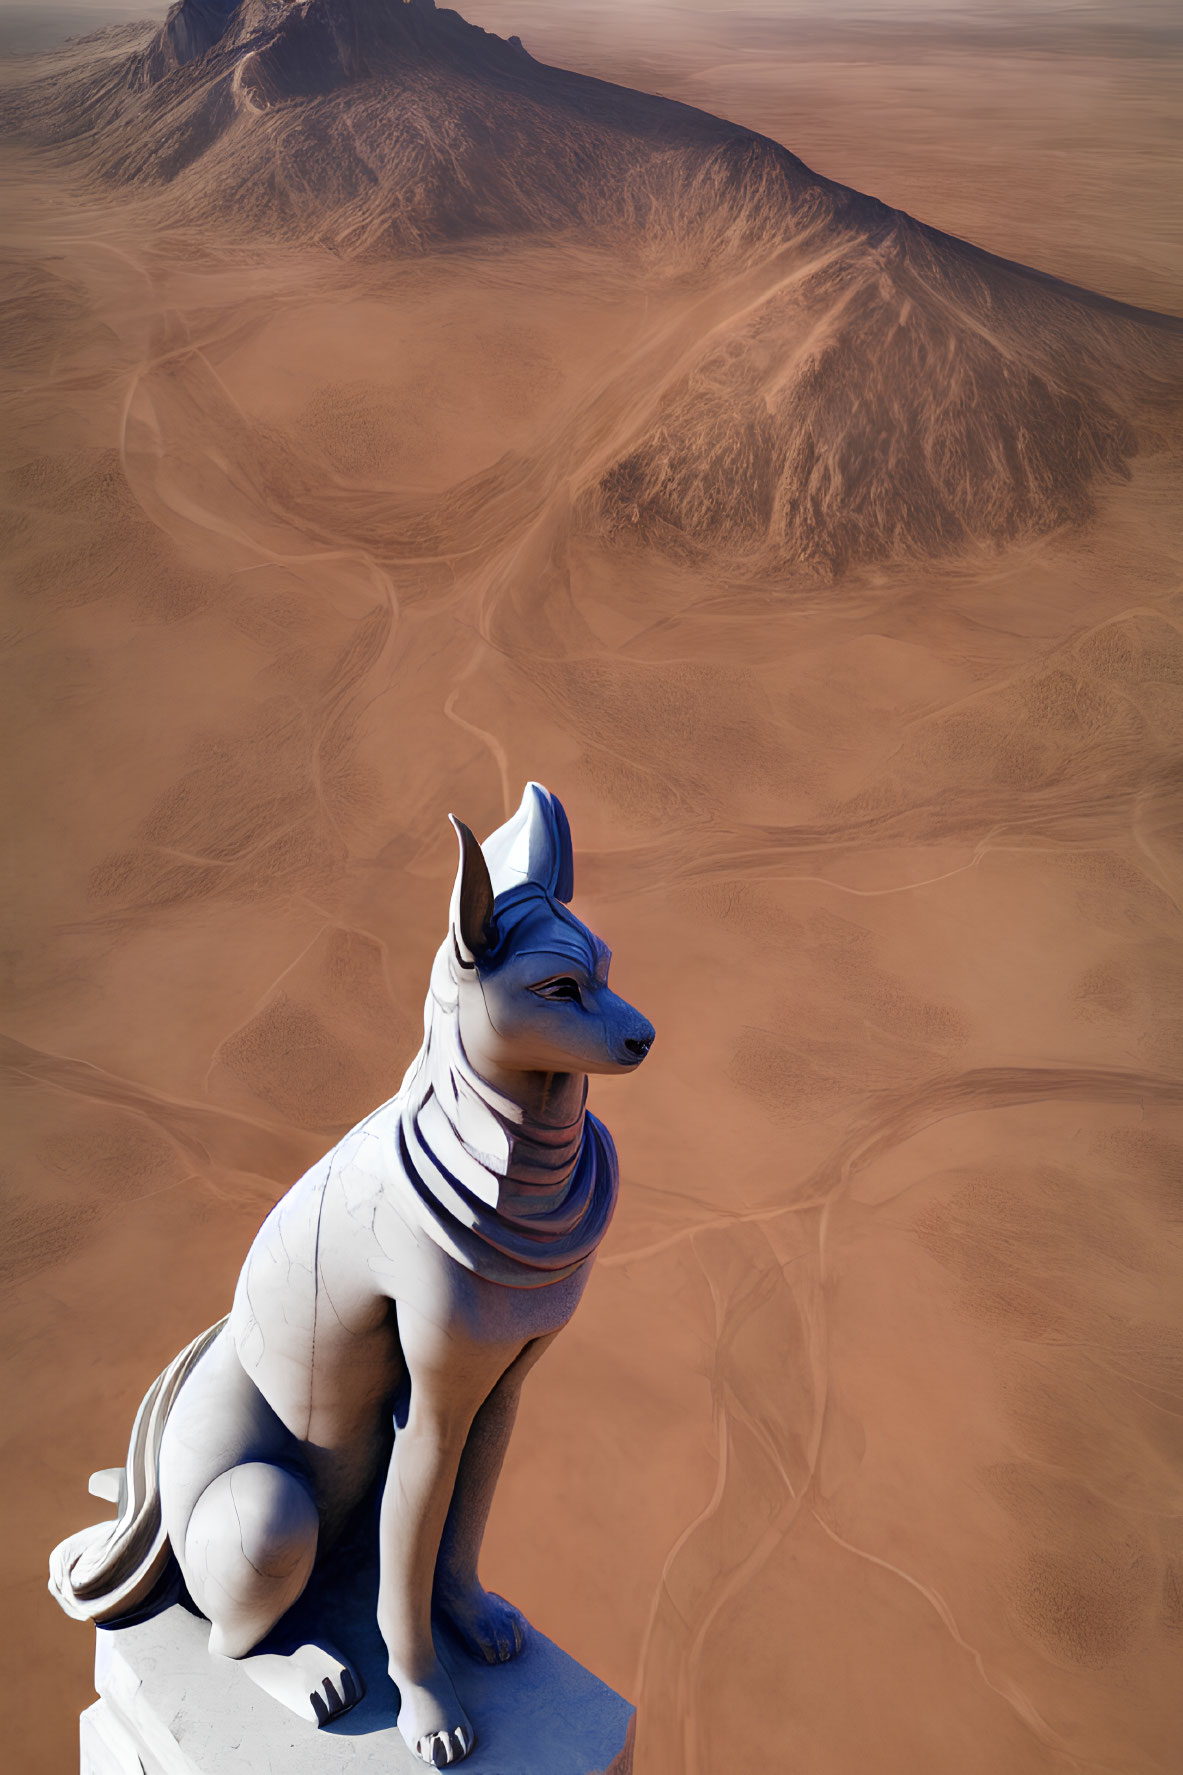 Egyptian Anubis-like statue in desert landscape with roads and mountains